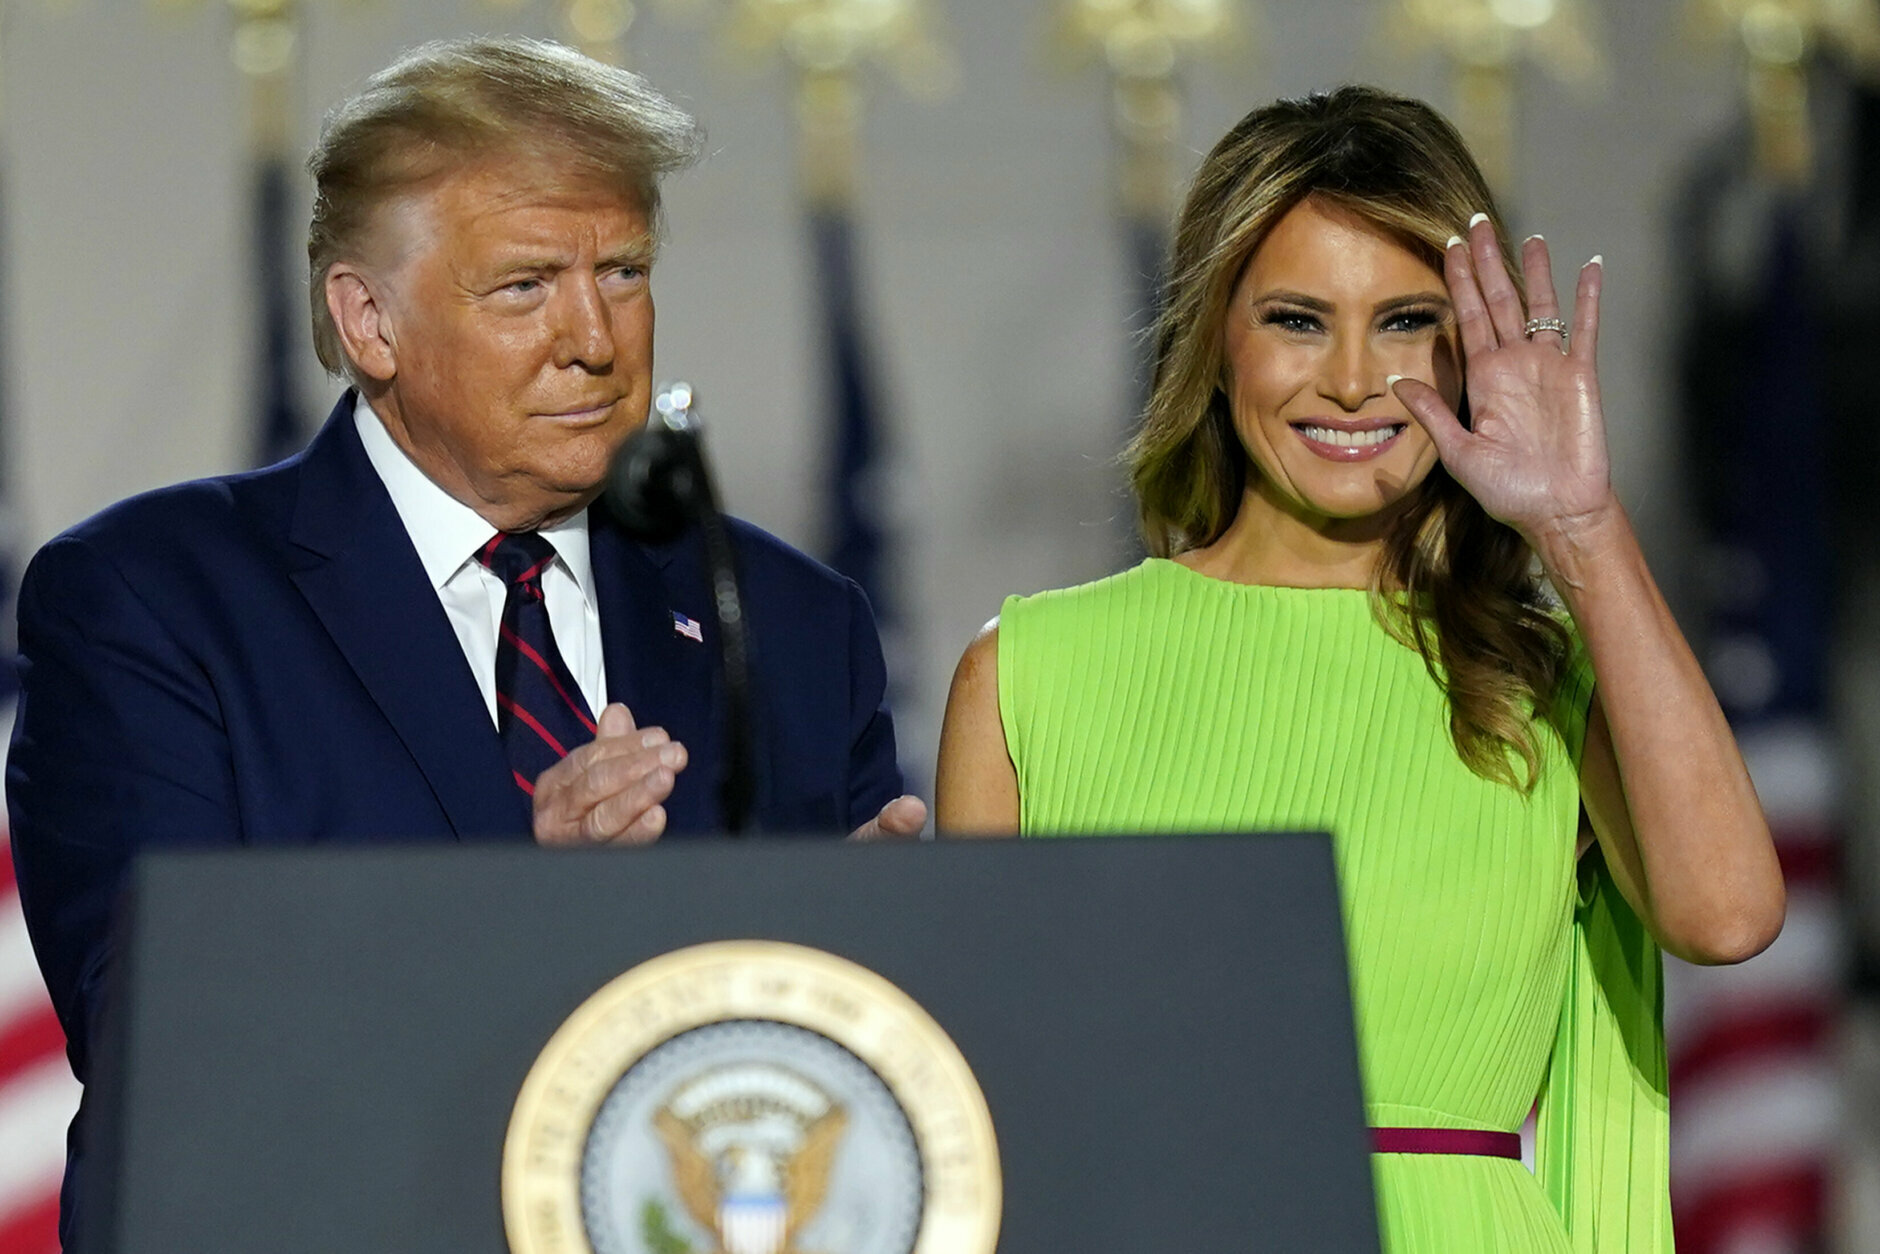 President Donald Trump and first lady Melania Trump arrive on South Lawn of the White House on the fourth day of the Republican National Convention, Thursday, Aug. 27, 2020, in Washington. (AP Photo/Evan Vucci)